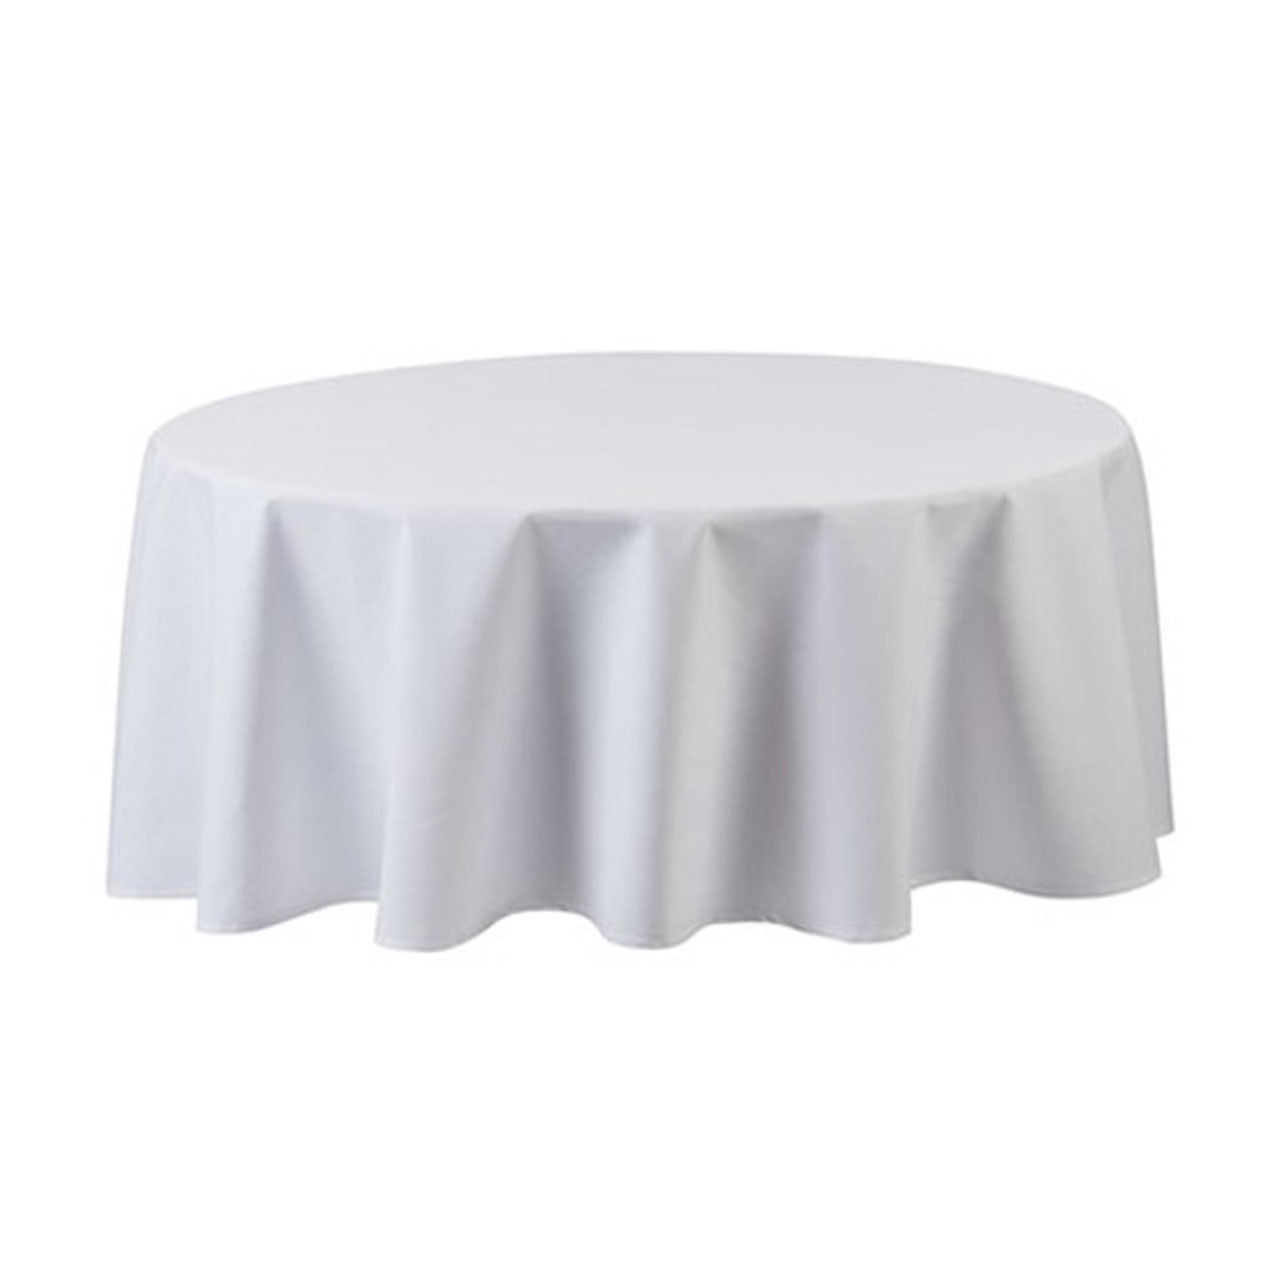 What is the material of the Seamless White 120 round tablecloth?